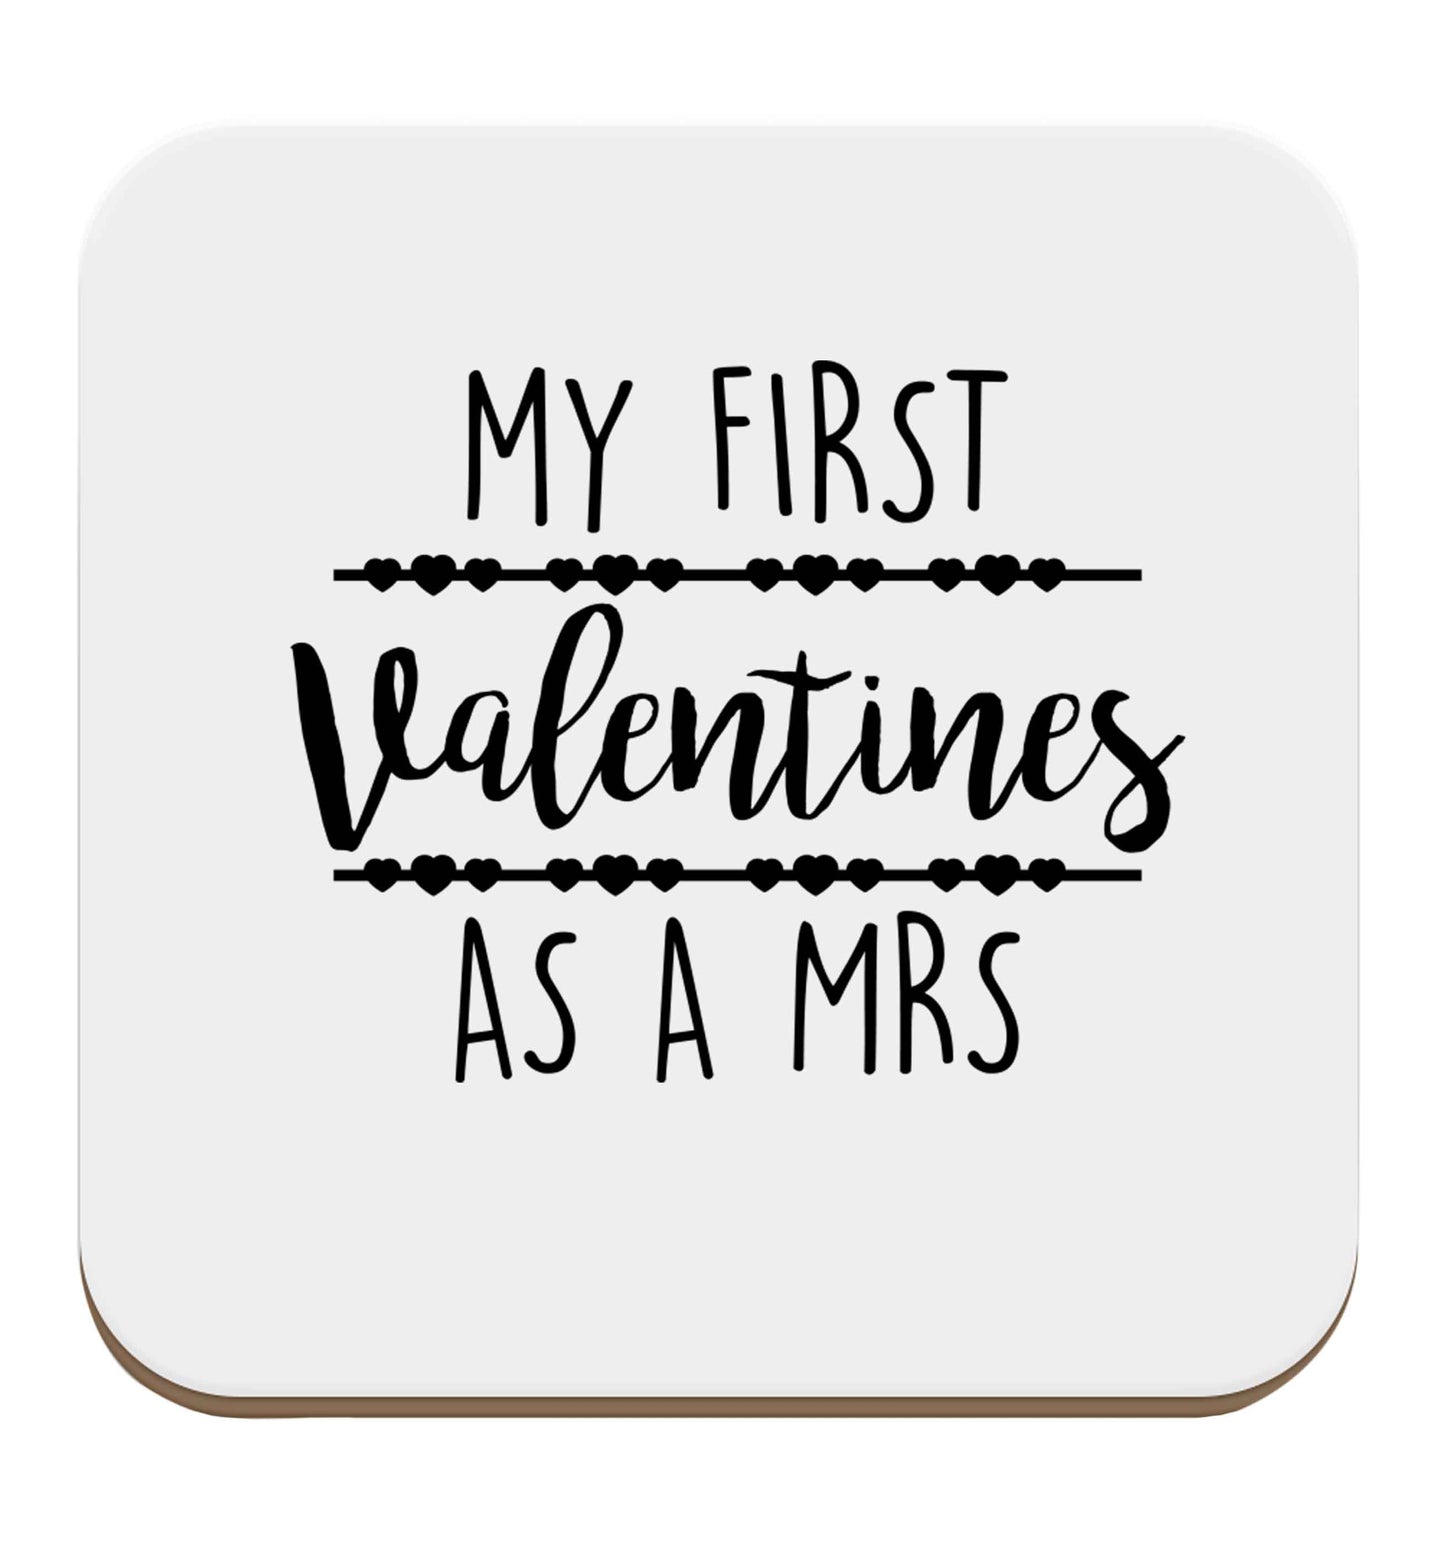 My first valentines as a Mrs set of four coasters